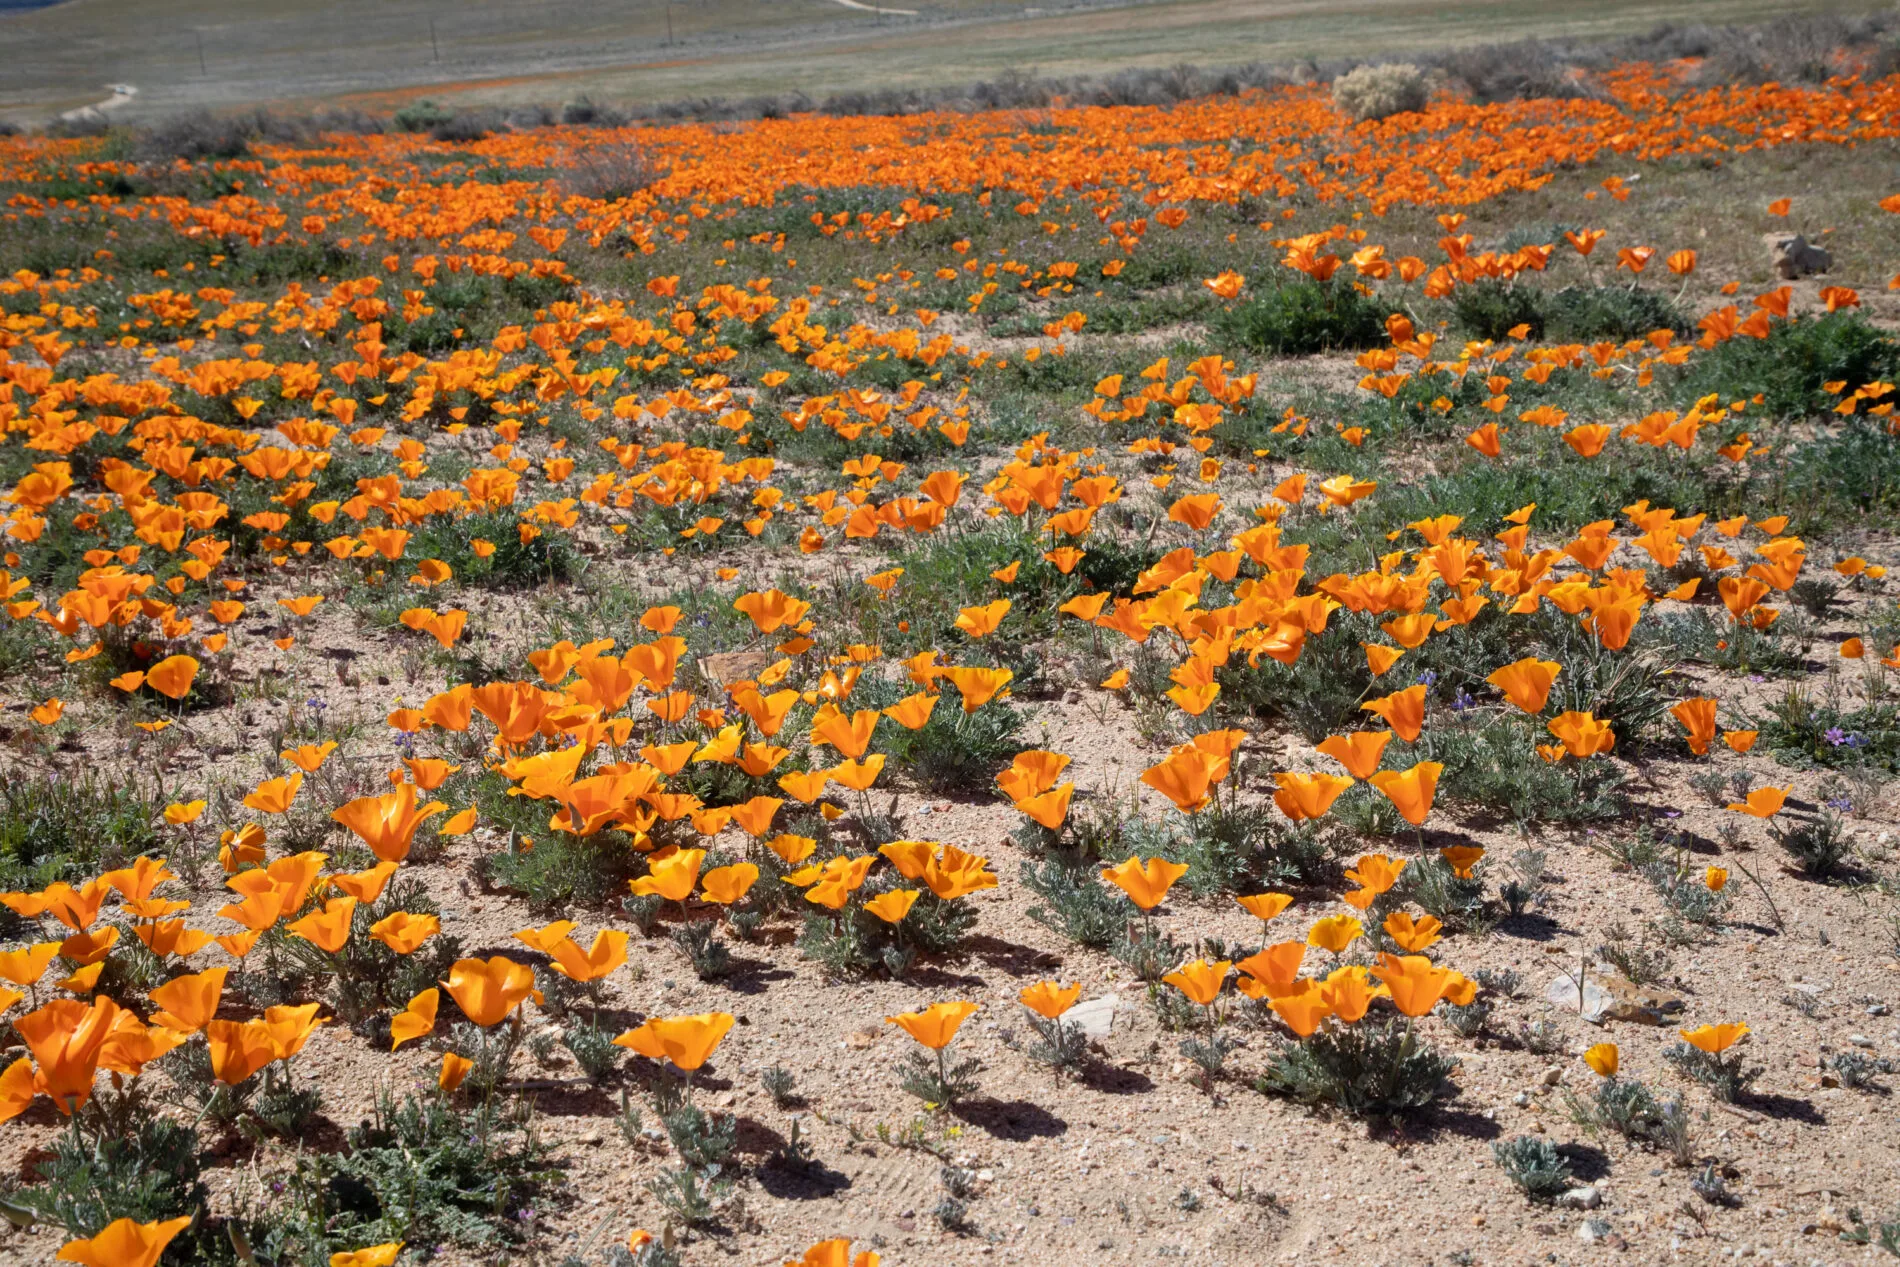 California poppies blooming in early May at Antelope Valley.